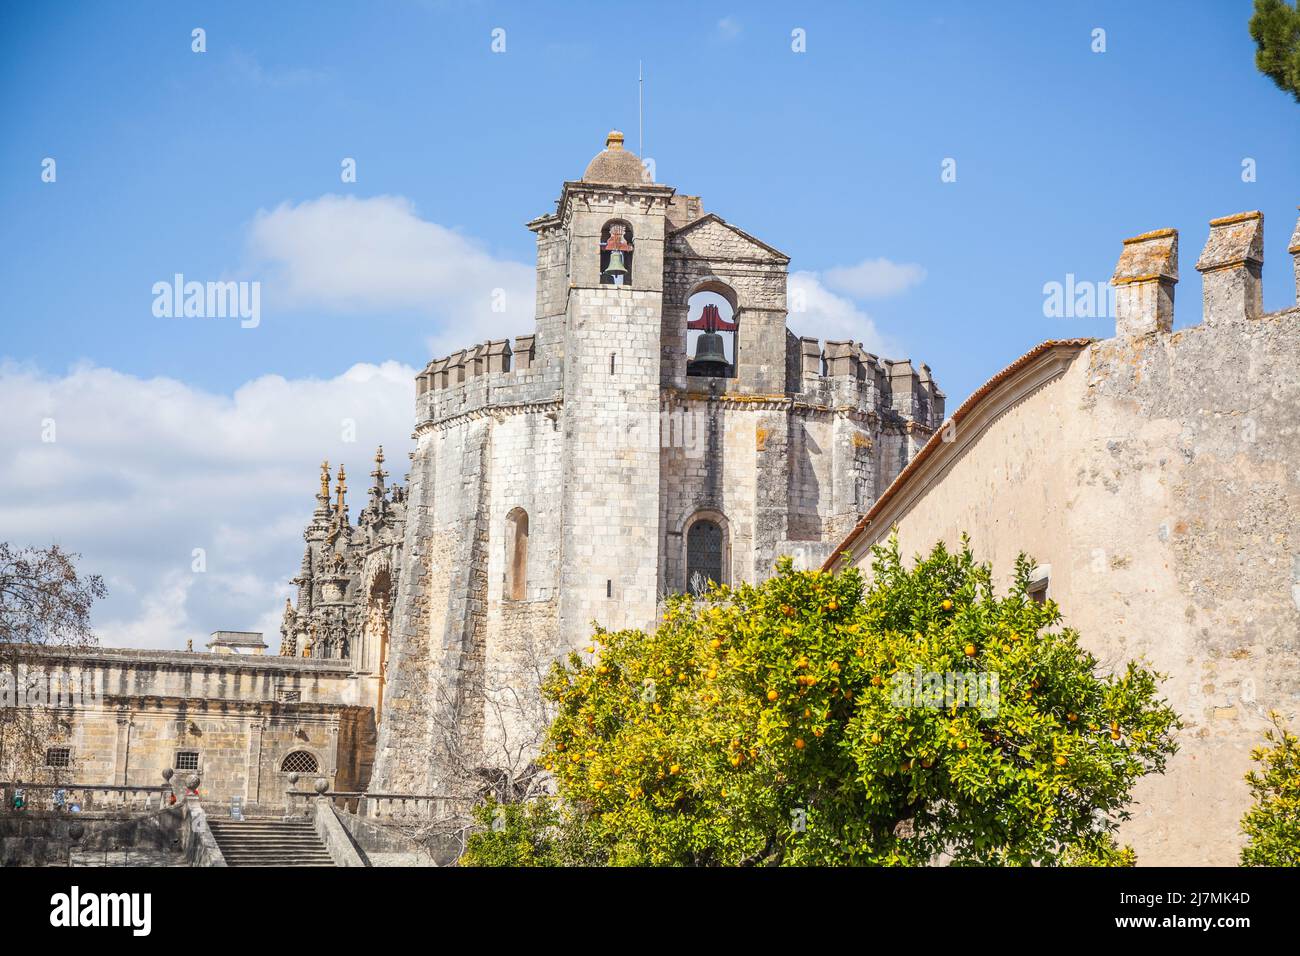 view of the Monastery castle in Tomar Portugal Stock Photo